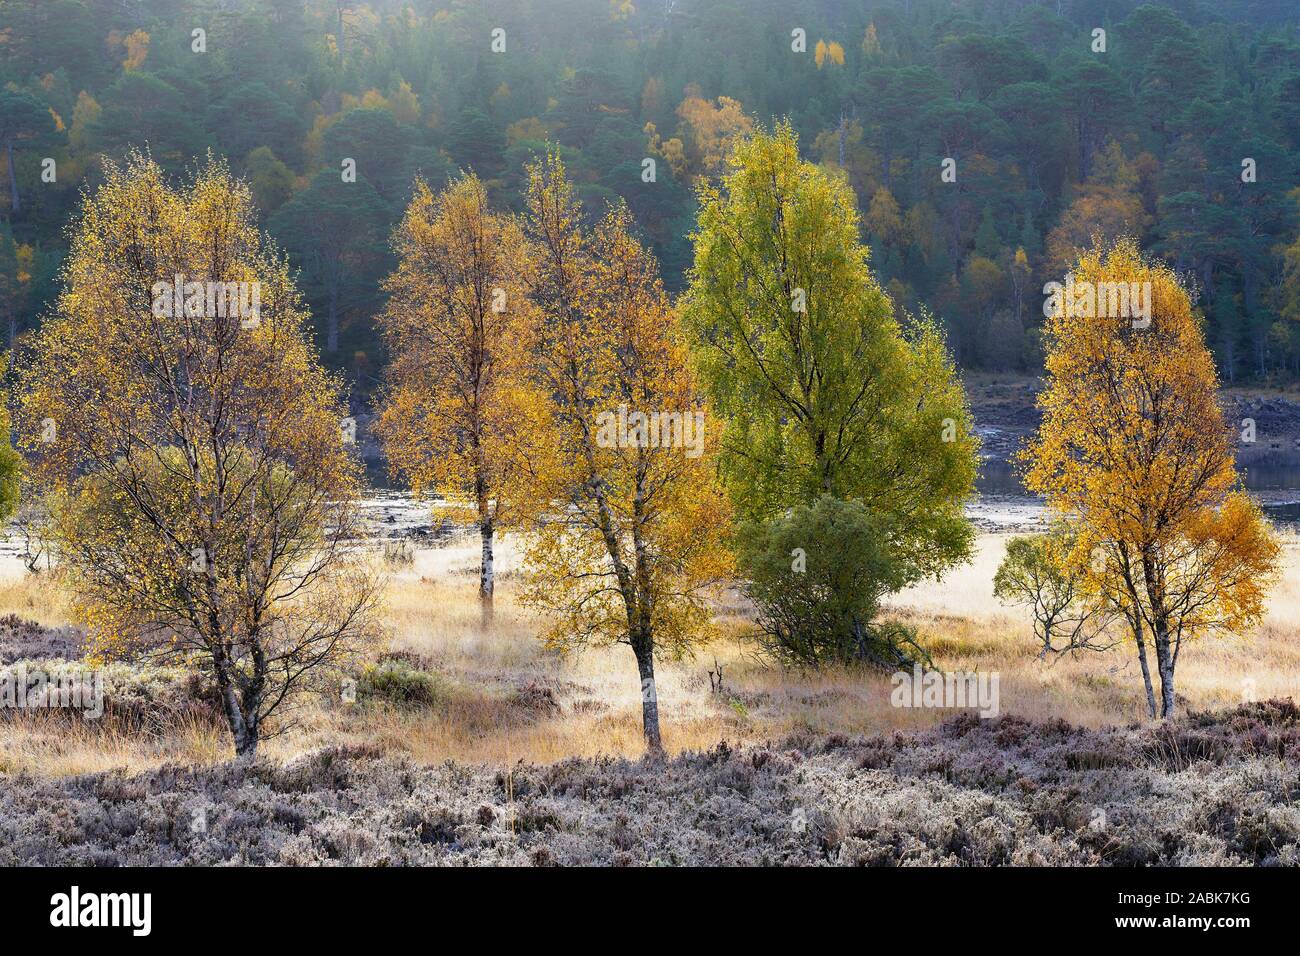 Silver birch trees in autumn colours and frost, Glen Affric, Inverness, Highland, Scotland. Stock Photo